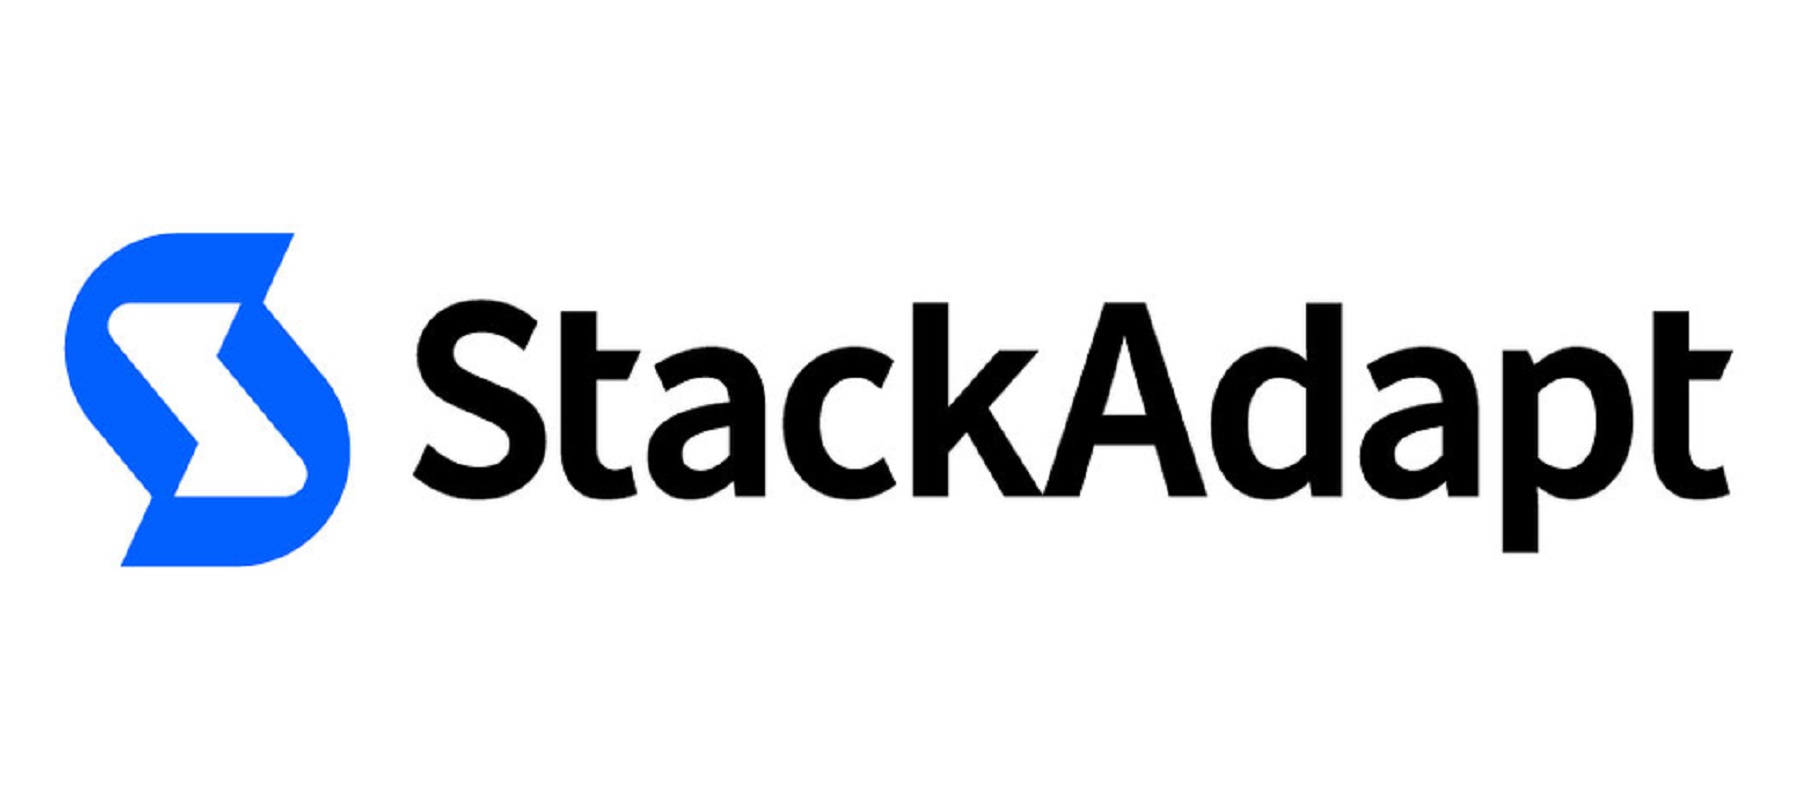 StackAdapt and OpenX partner to enable political advertisers to reach target audiences programmatically